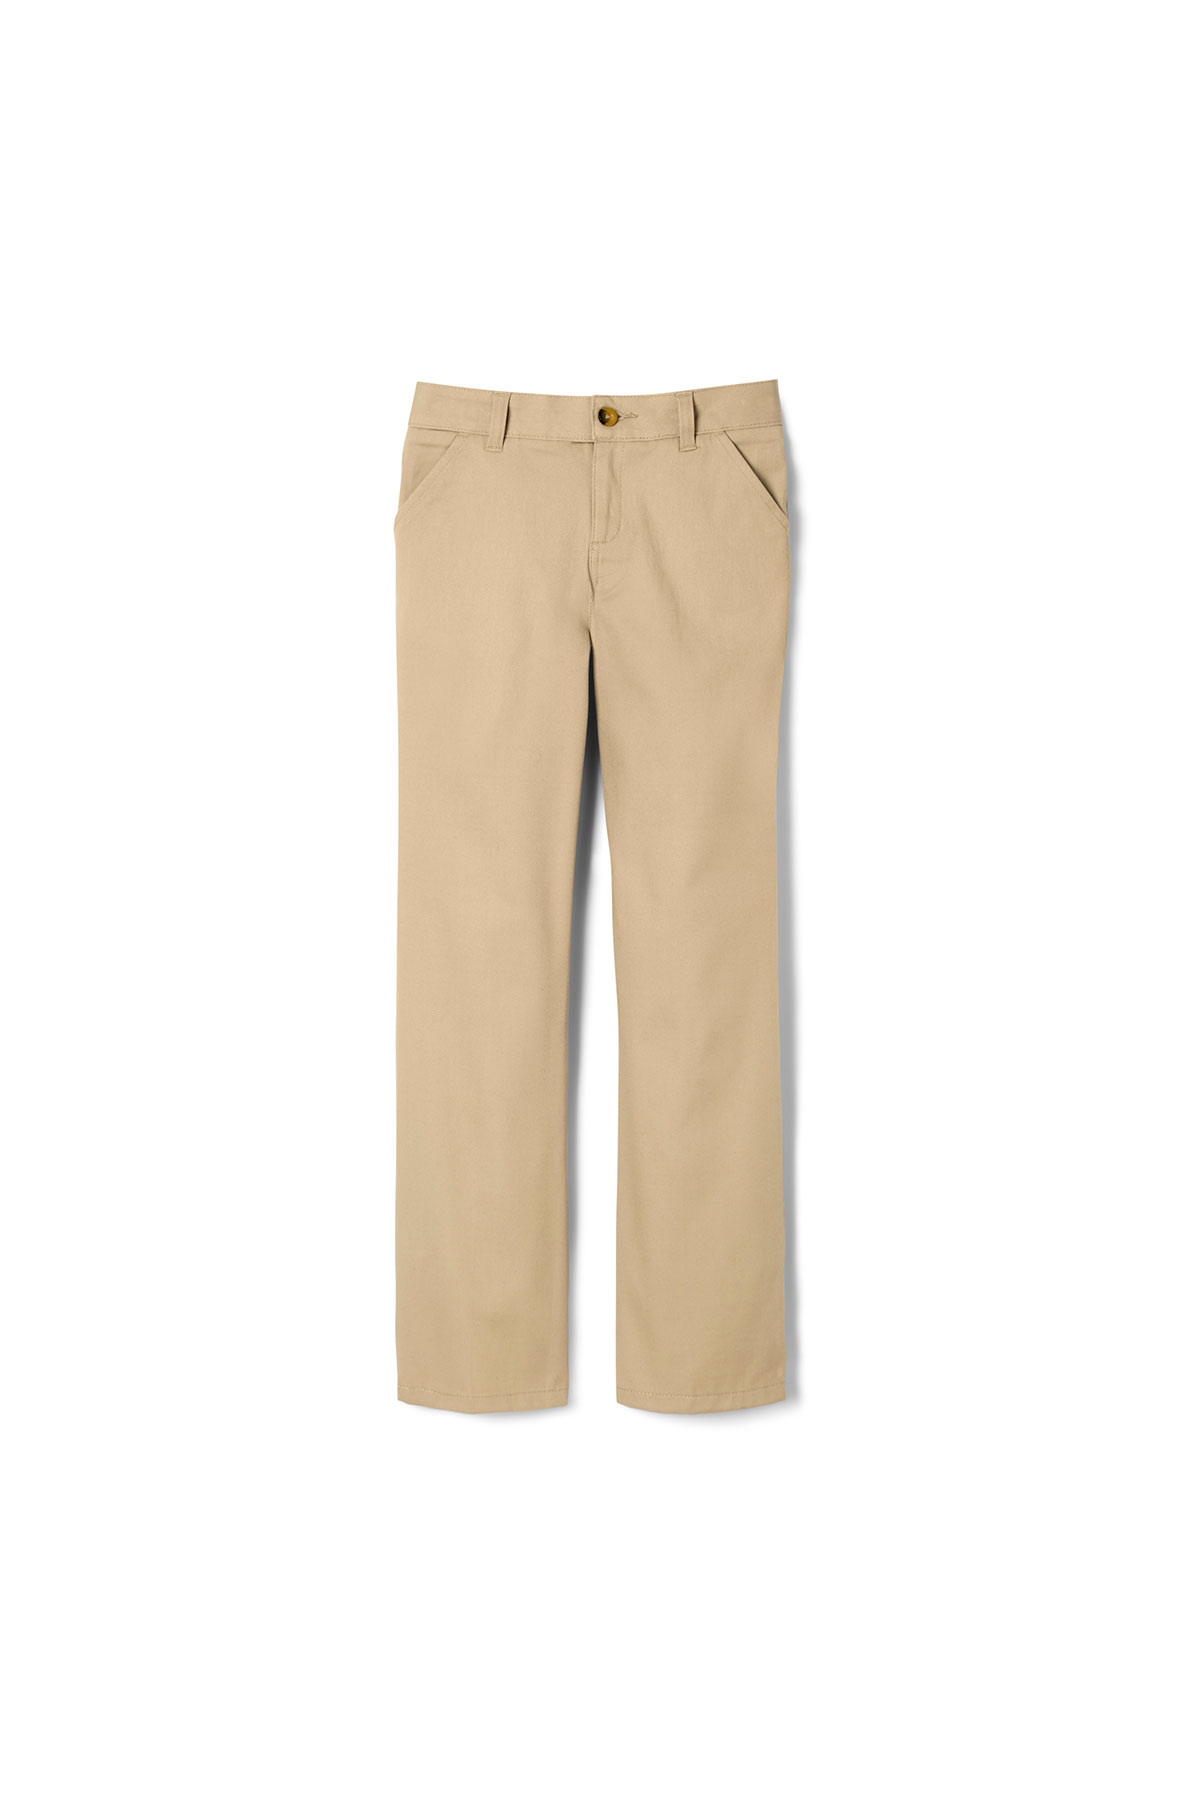 GIRLS STRETCH TWILL STRAIGHT LEG PANT – Levines Stores